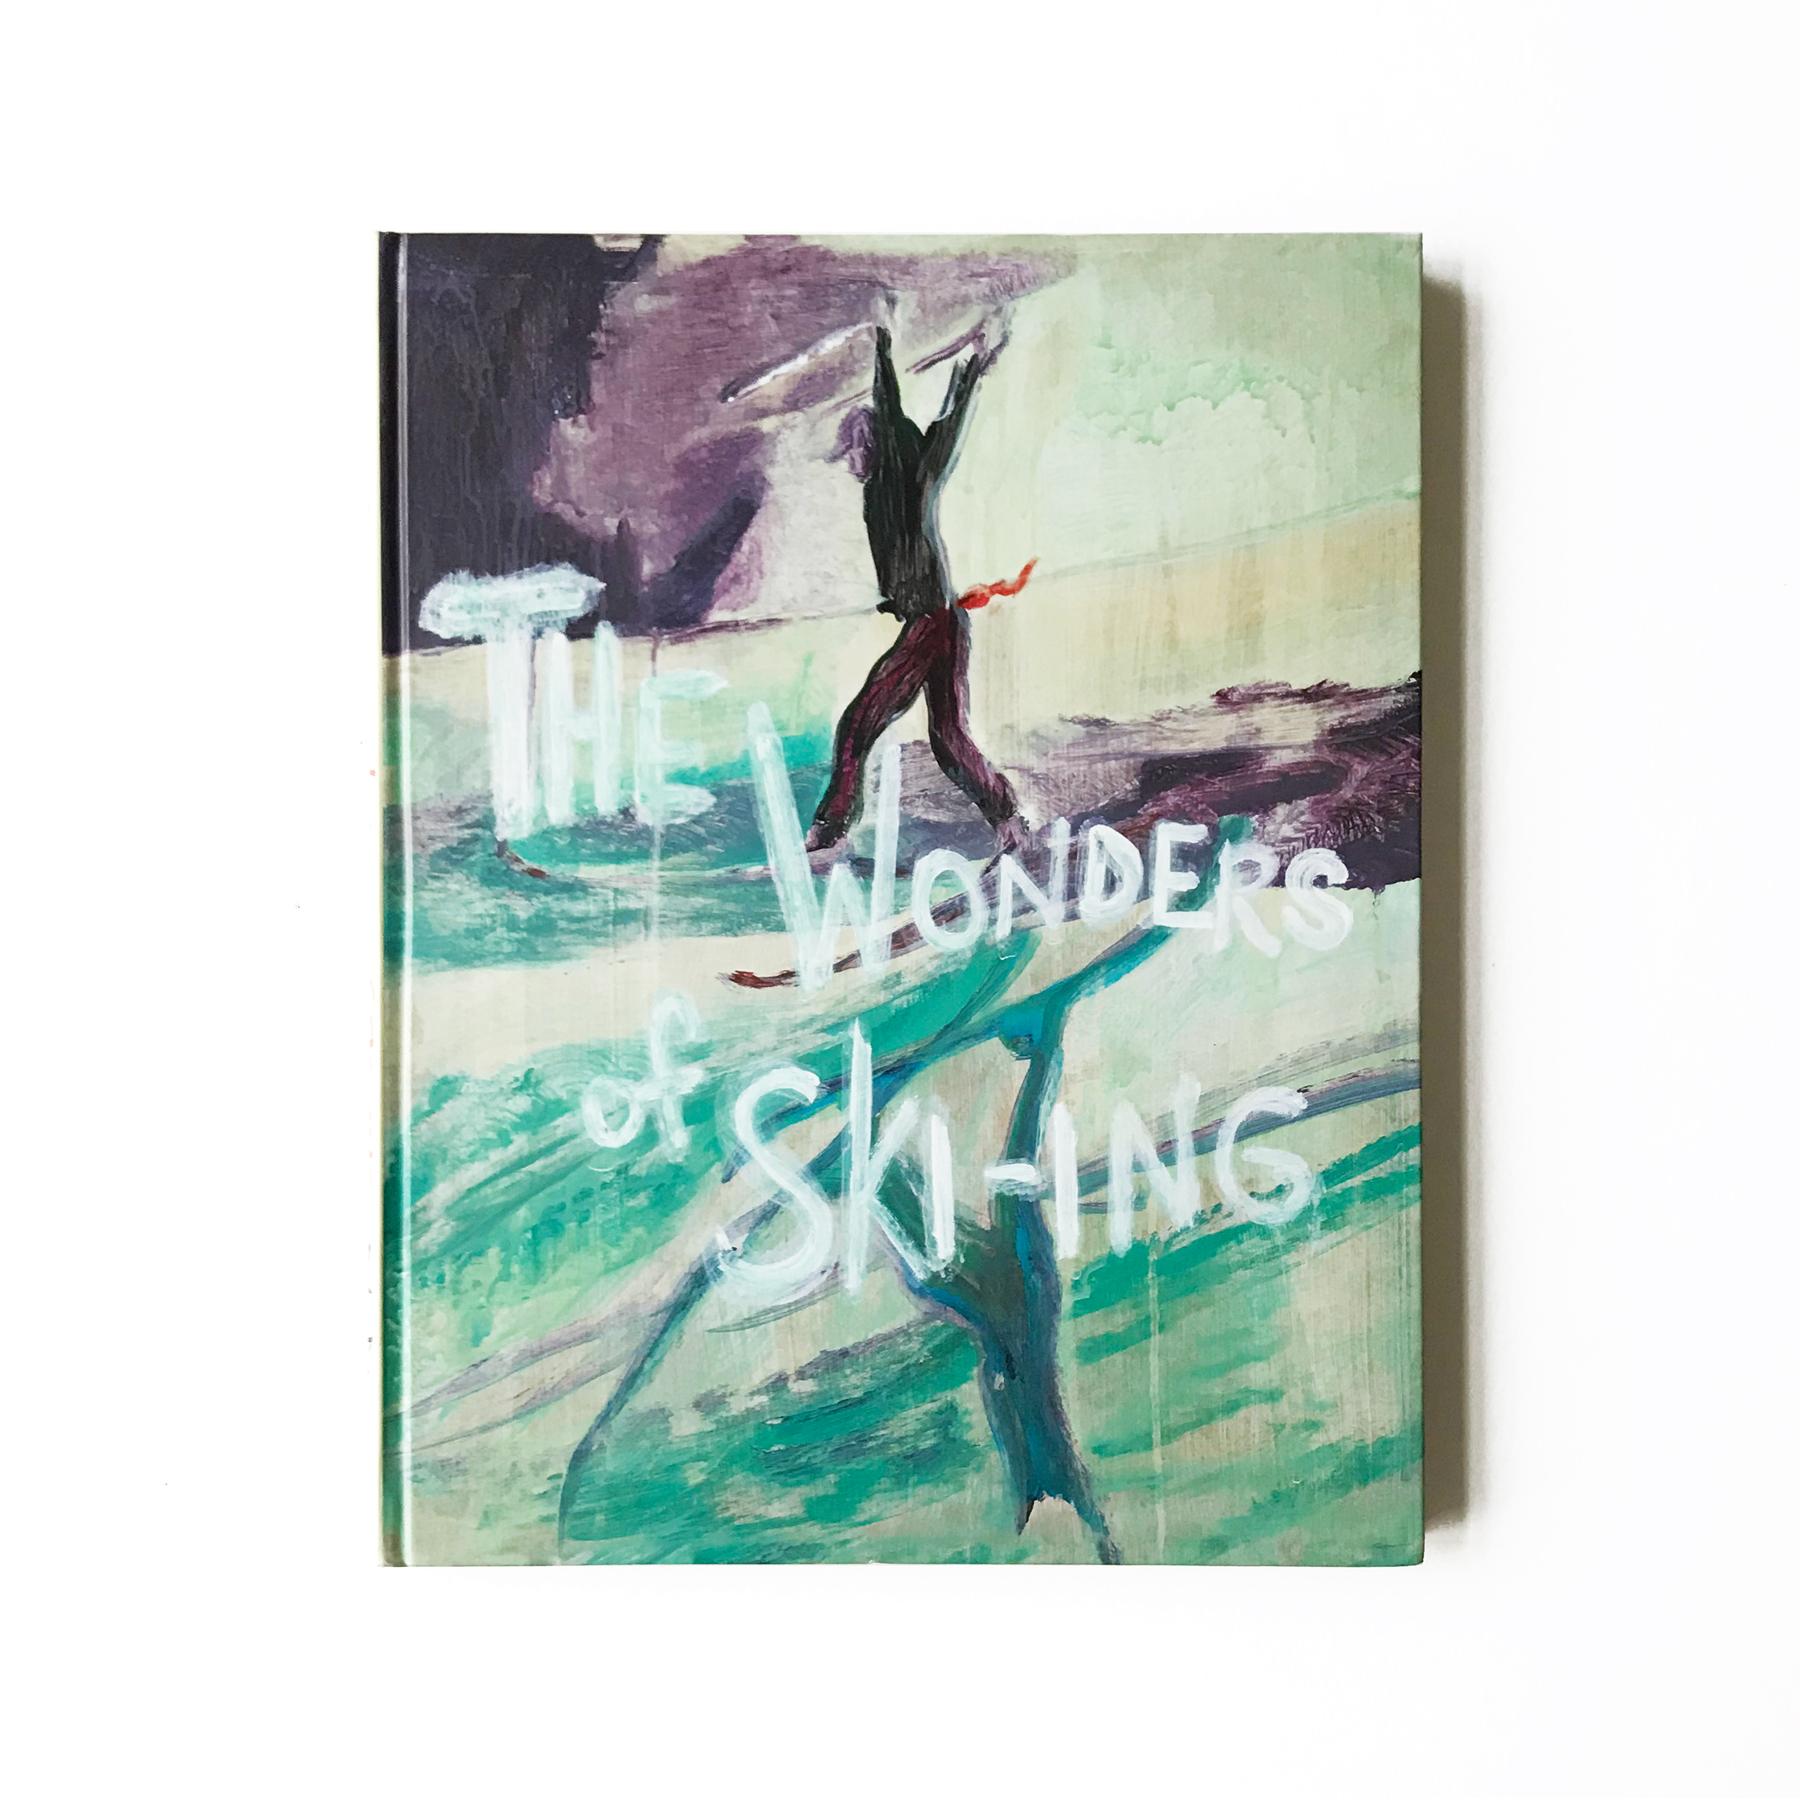 The Wonders of Ski-ing, Book and Print, Contemporary Art, 21st Century (Beige), Figurative Print, von Peter Doig